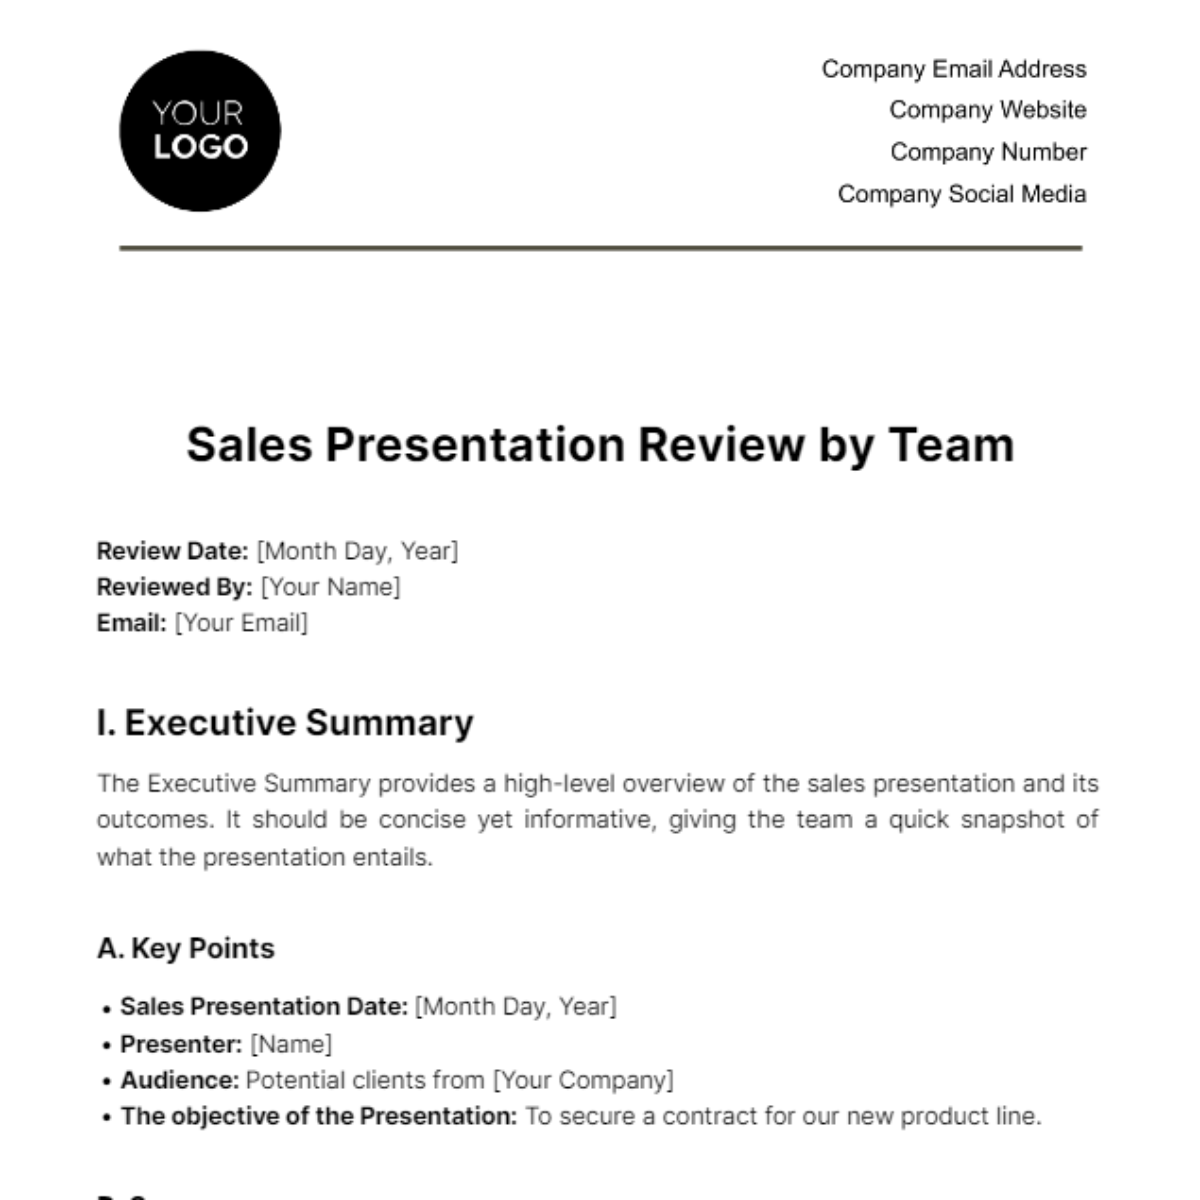 Free Sales Presentation Review by Team Template